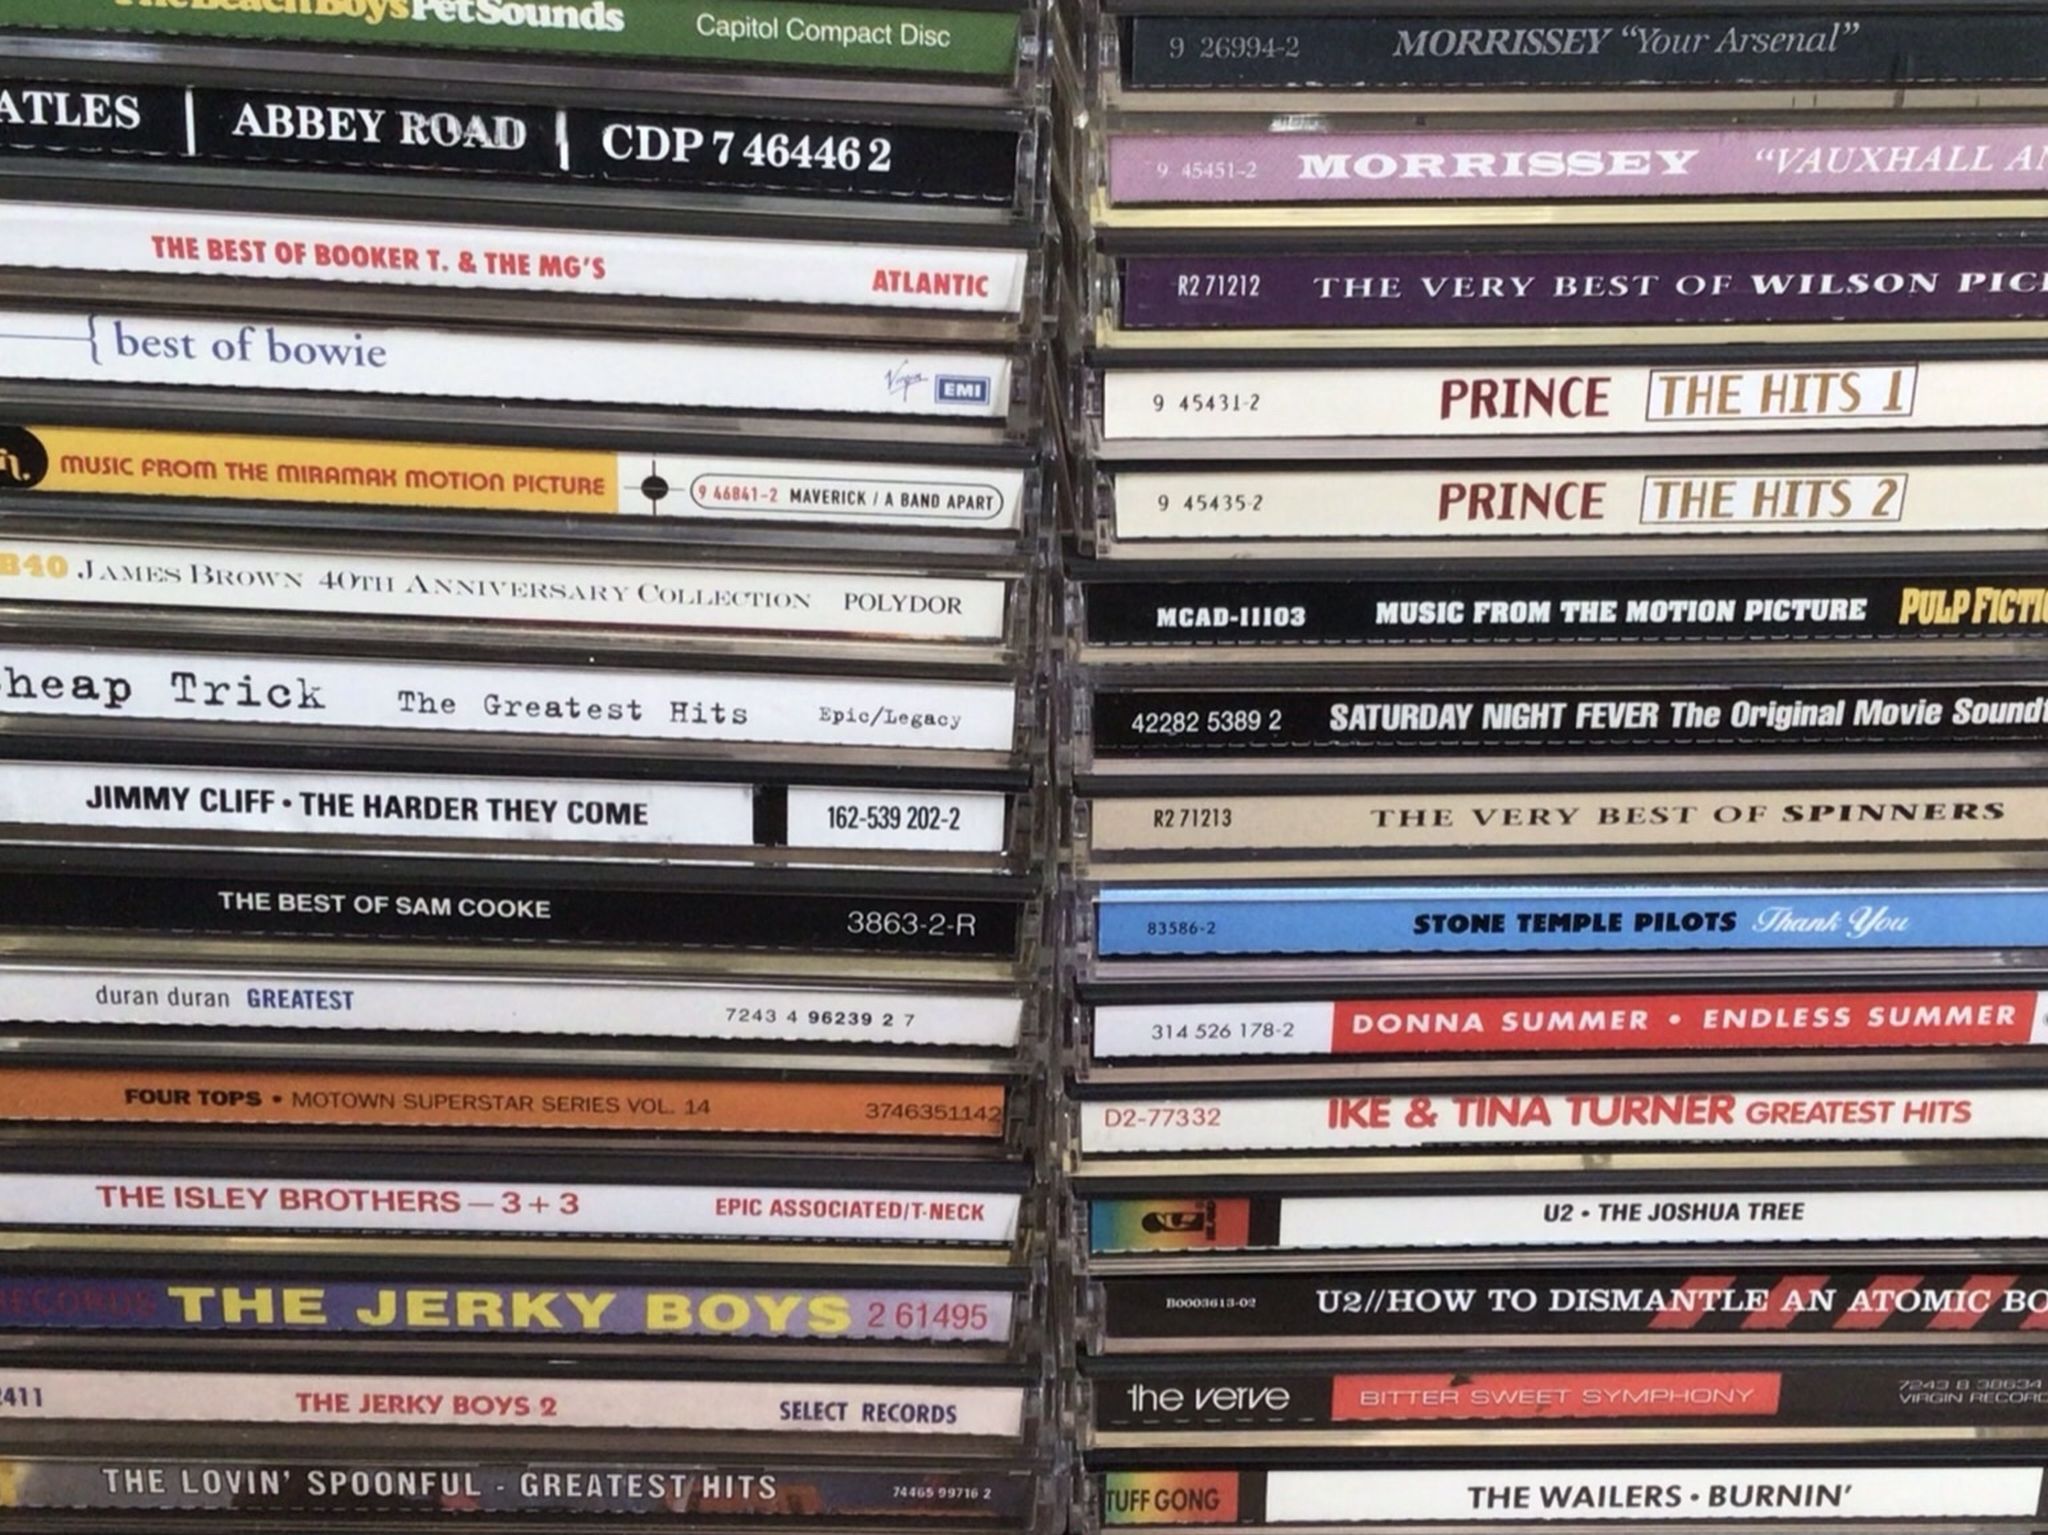 CDs - 34 Total: Beach Boys, Beatles, Prince, and more. See pics for selections.